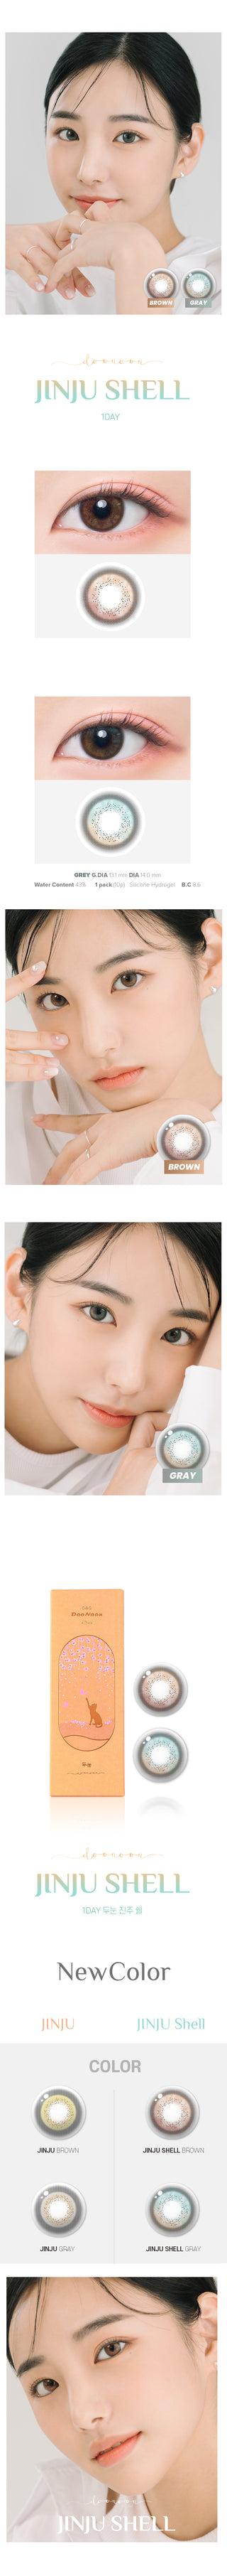 Variety of DooNoon Jinju Shell 1-Day Grey (10pk) contact lens colors displayed, with closeups of an eye wearing the contact lens colors, and with a model wearing the contact lens colors showing realistic eye-enlarging effect from various angles.